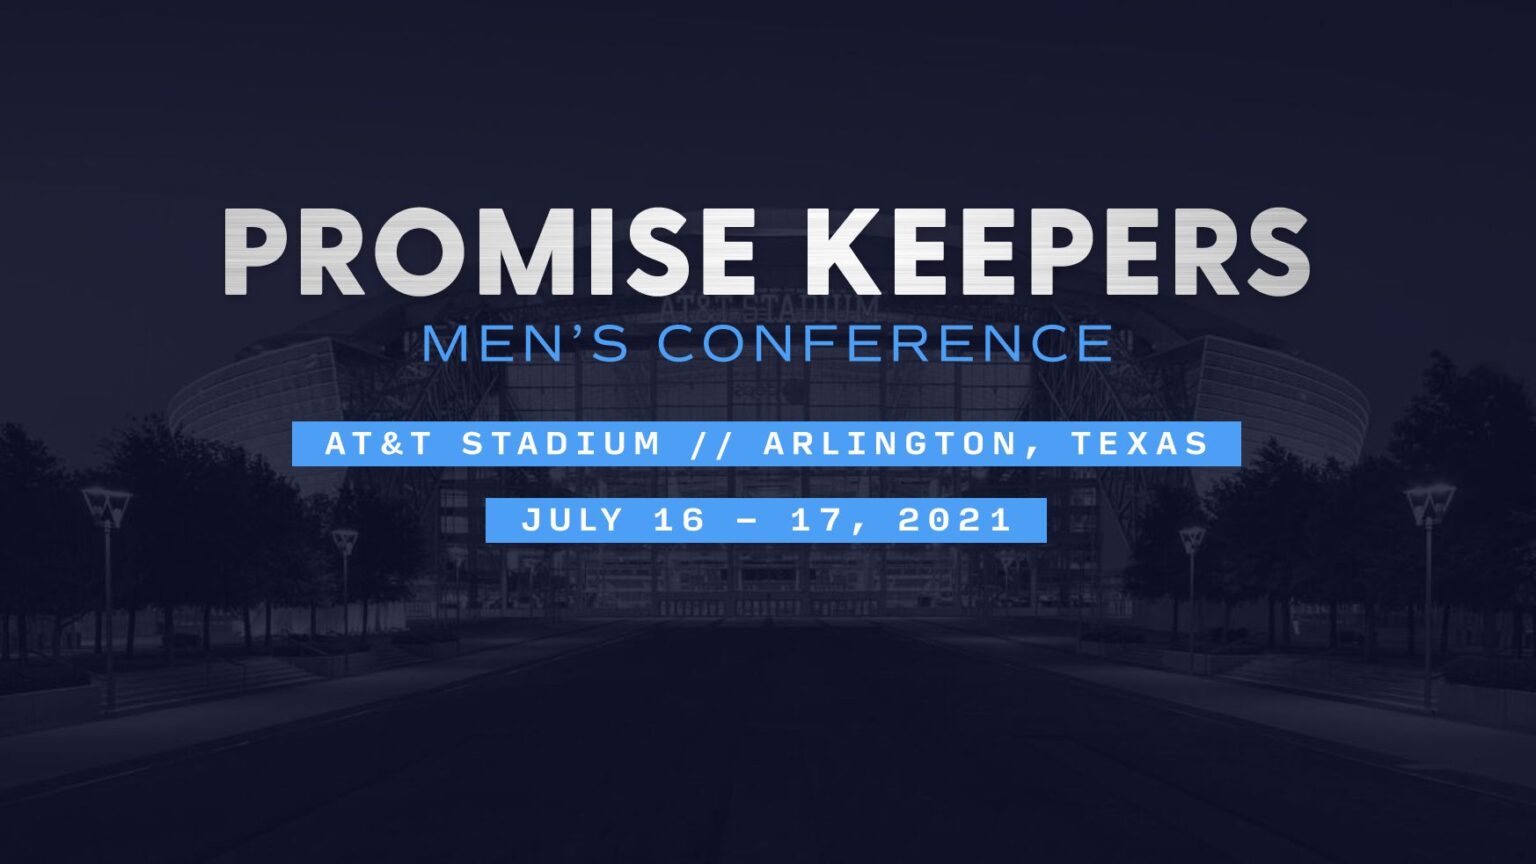 Promise Keepers Men's Conference The Thinking Conservative